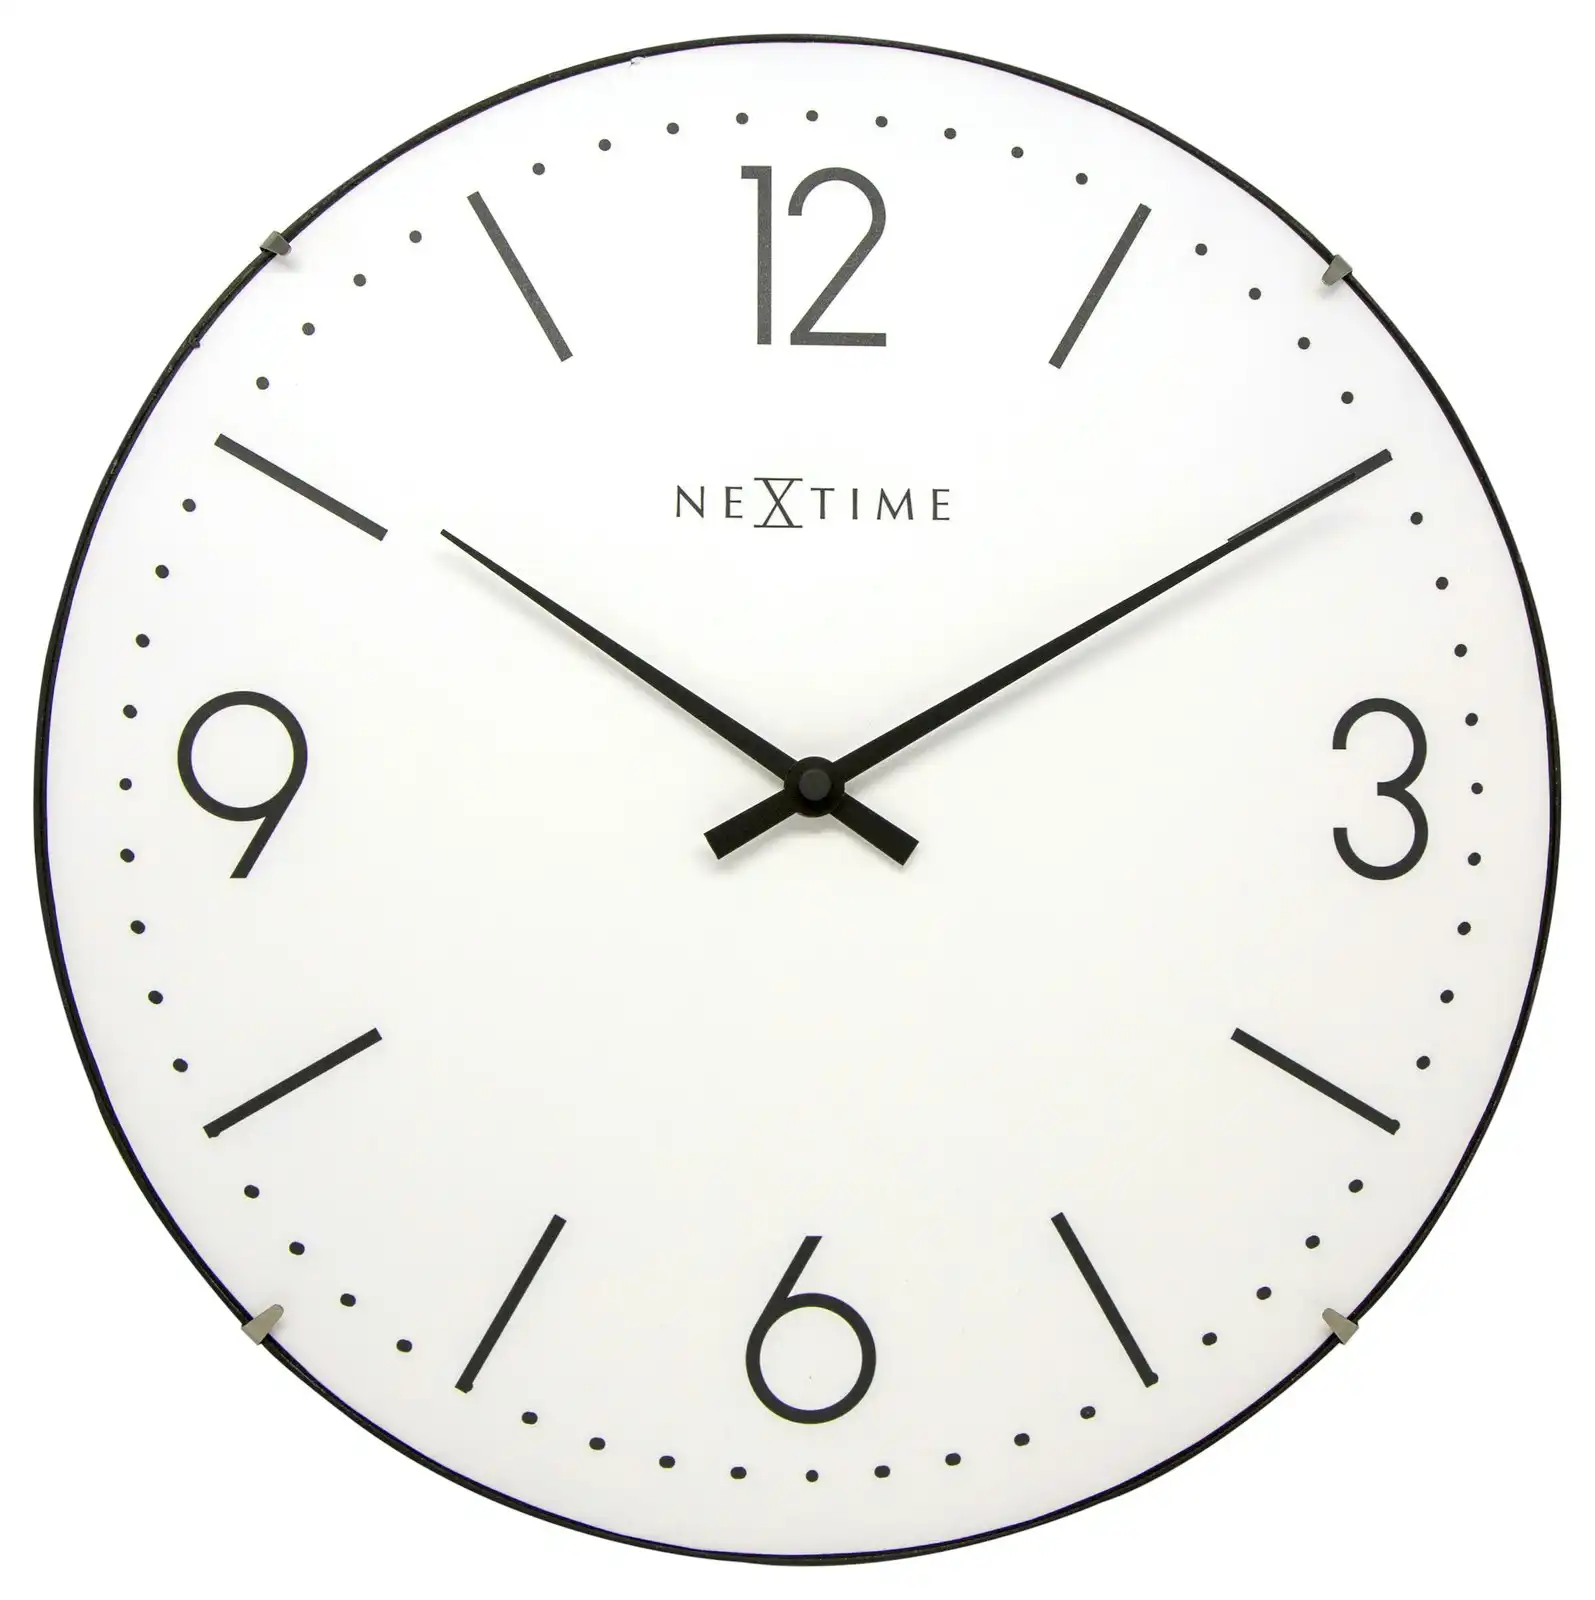 NeXtime Basic Dome 35cm Hanging Wall Clock Analogue Home/Room Round Decor White